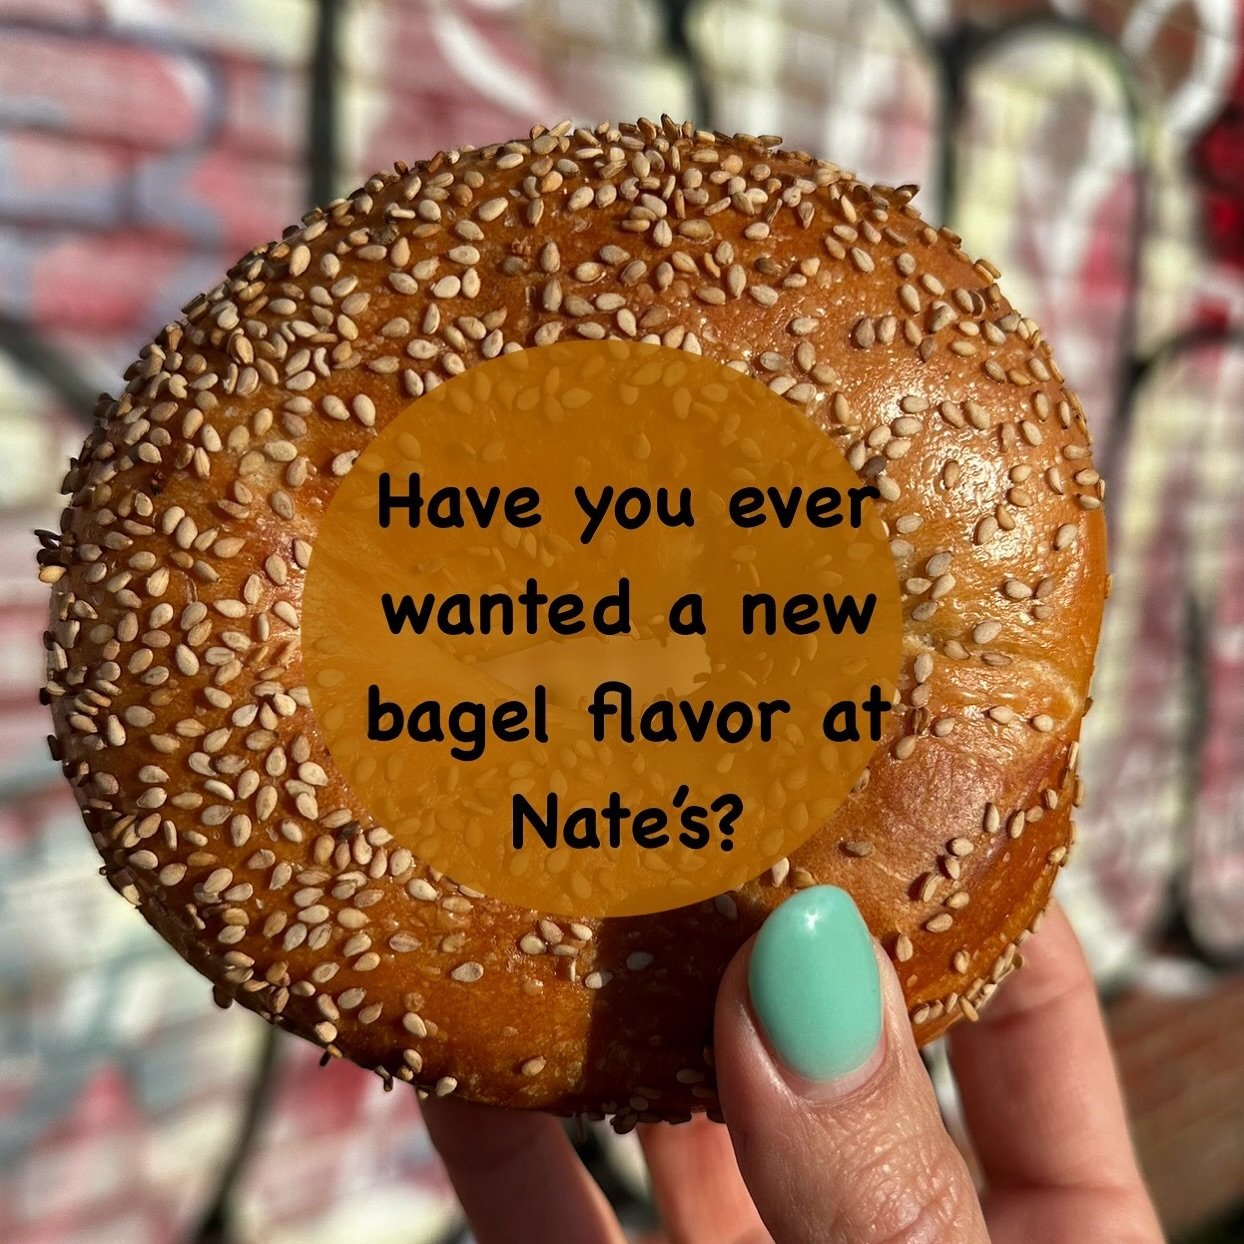 If YES, answer this survey! (Easy link in our story)
https://forms.gle/VaM7rHQQthVcNbMA8

We are working with some students at Atlee HS on a market research project and they chose to learn about the bagel world. We would love your real feedback, and 